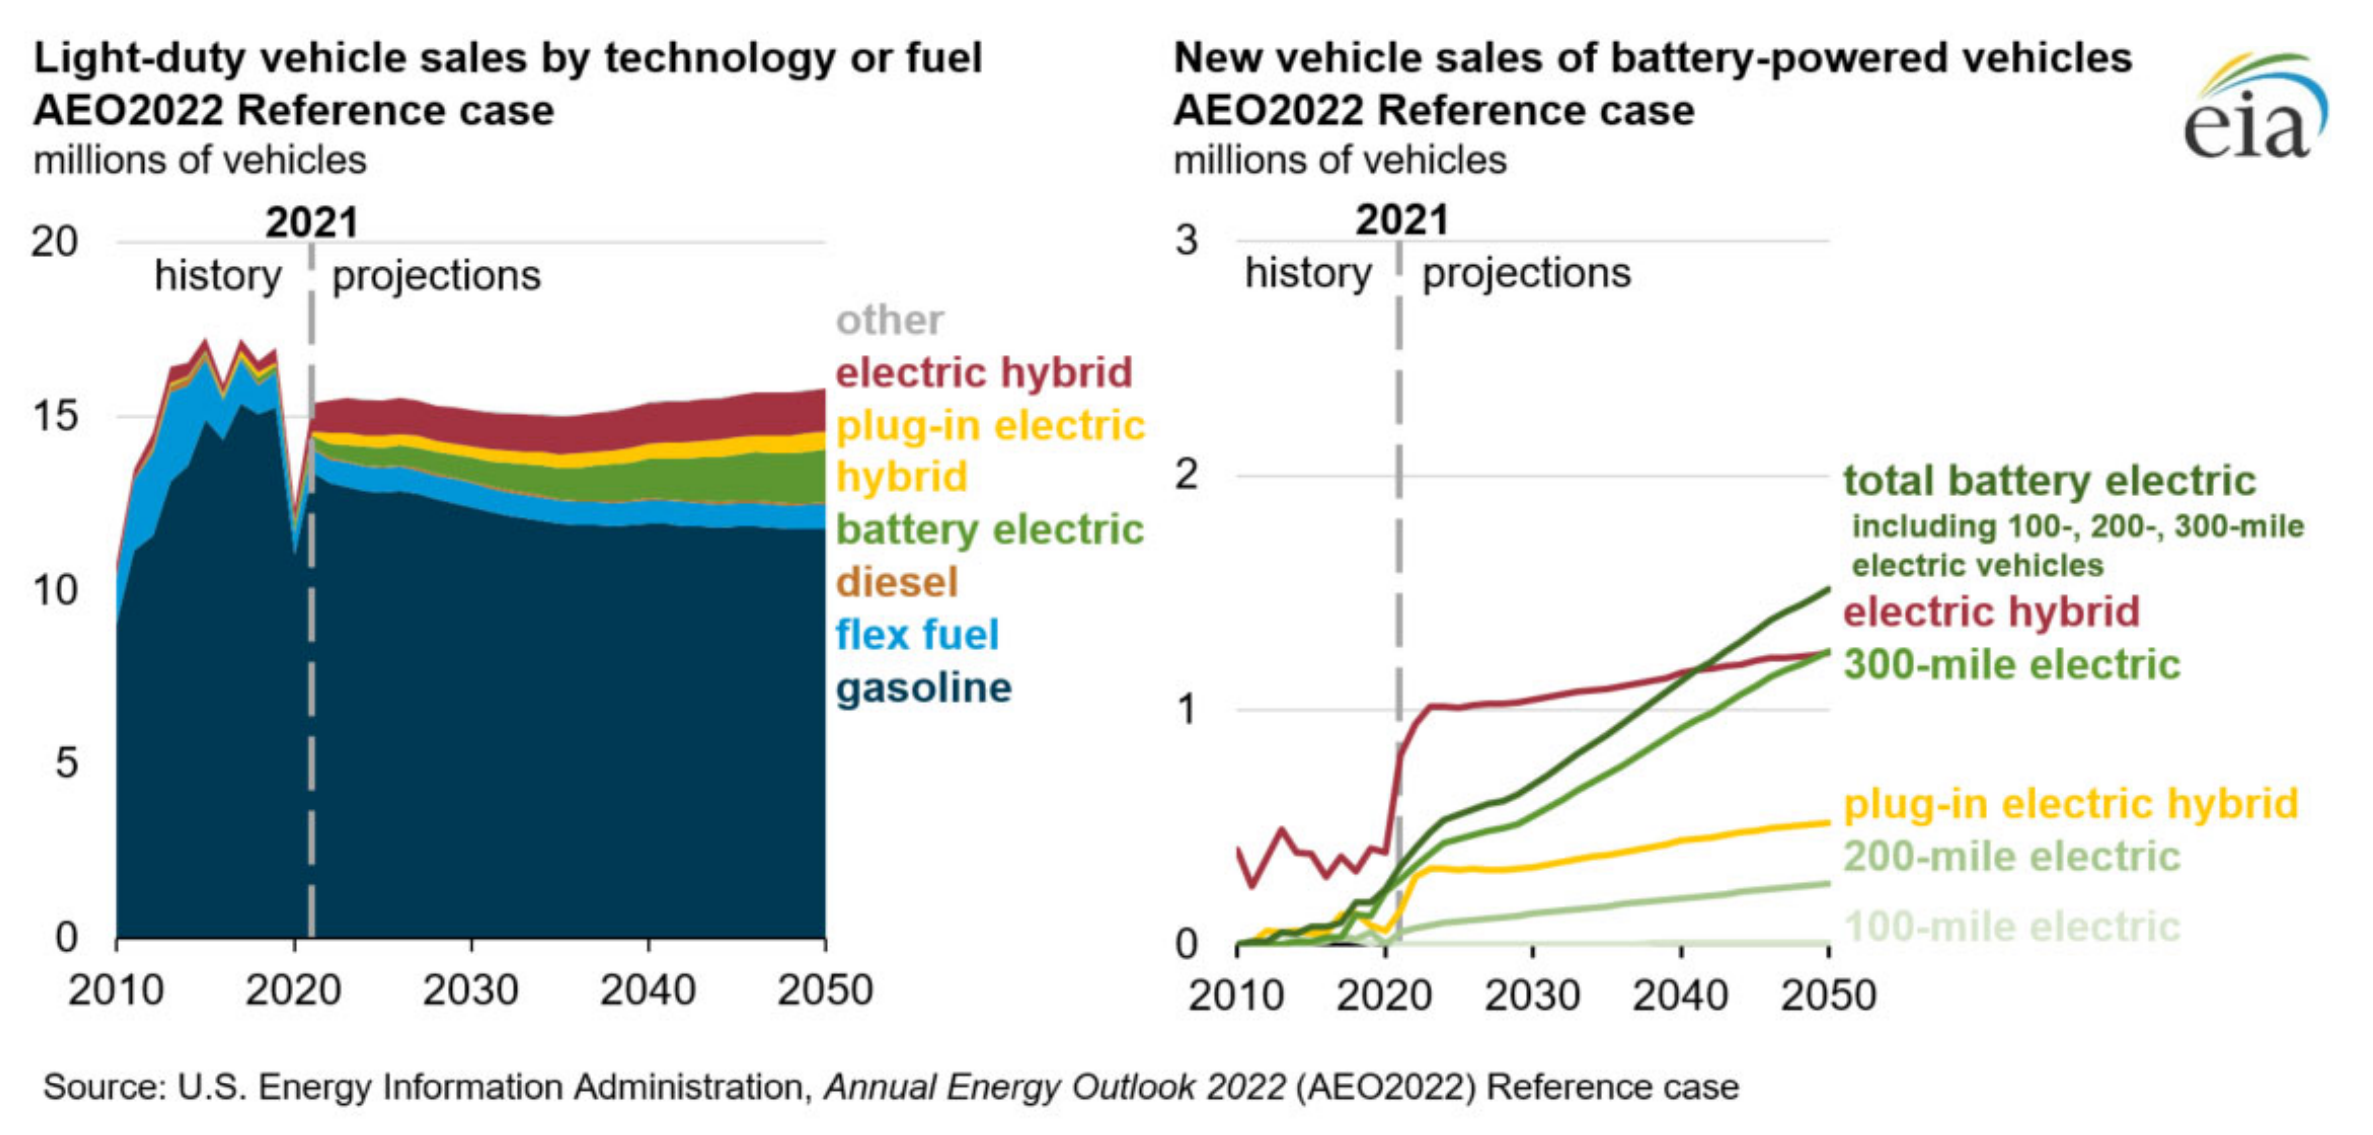 Projected U.S. light-utility vehicle sales by technology or fuel in the AEO2022 reference case (left) and new vehicle sales of battery-powered vehicles (right). Graphic: EIA